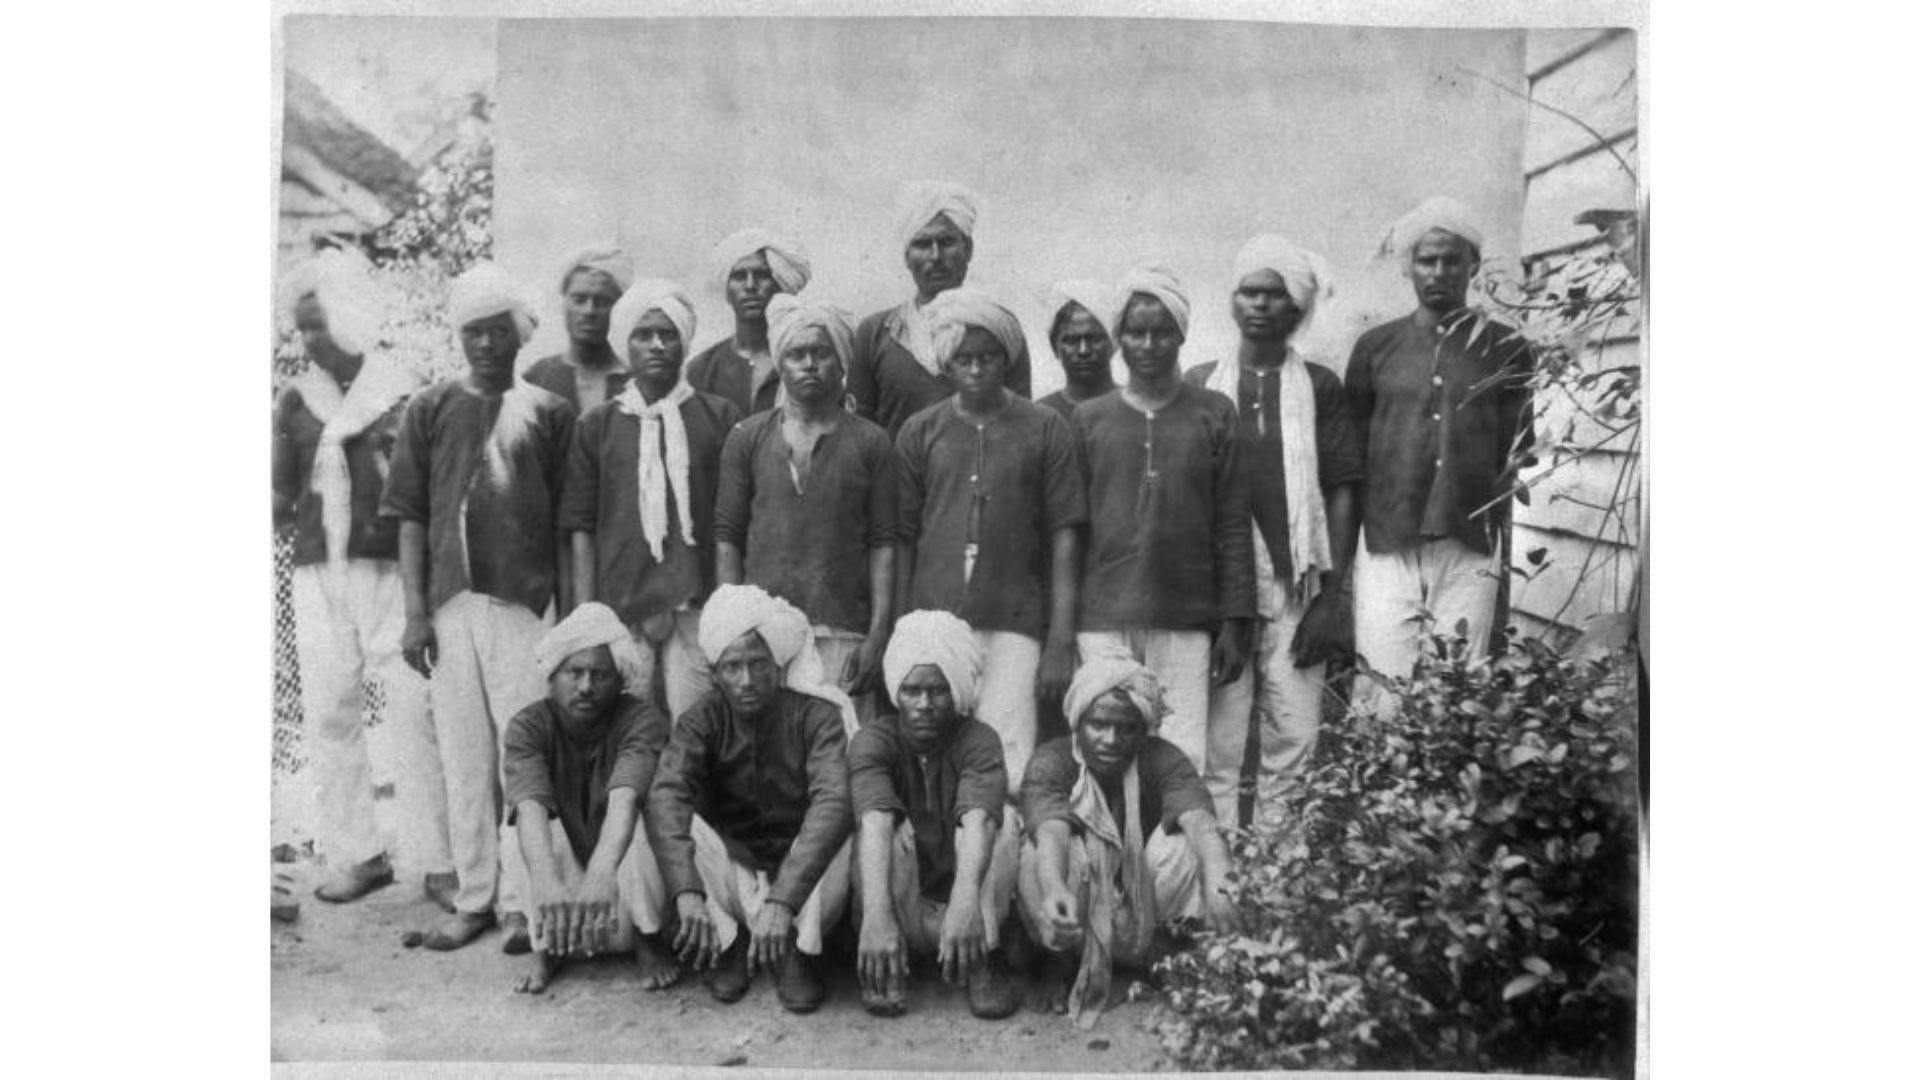 Indian Indentured Labourers in Suriname | Wiki Commons